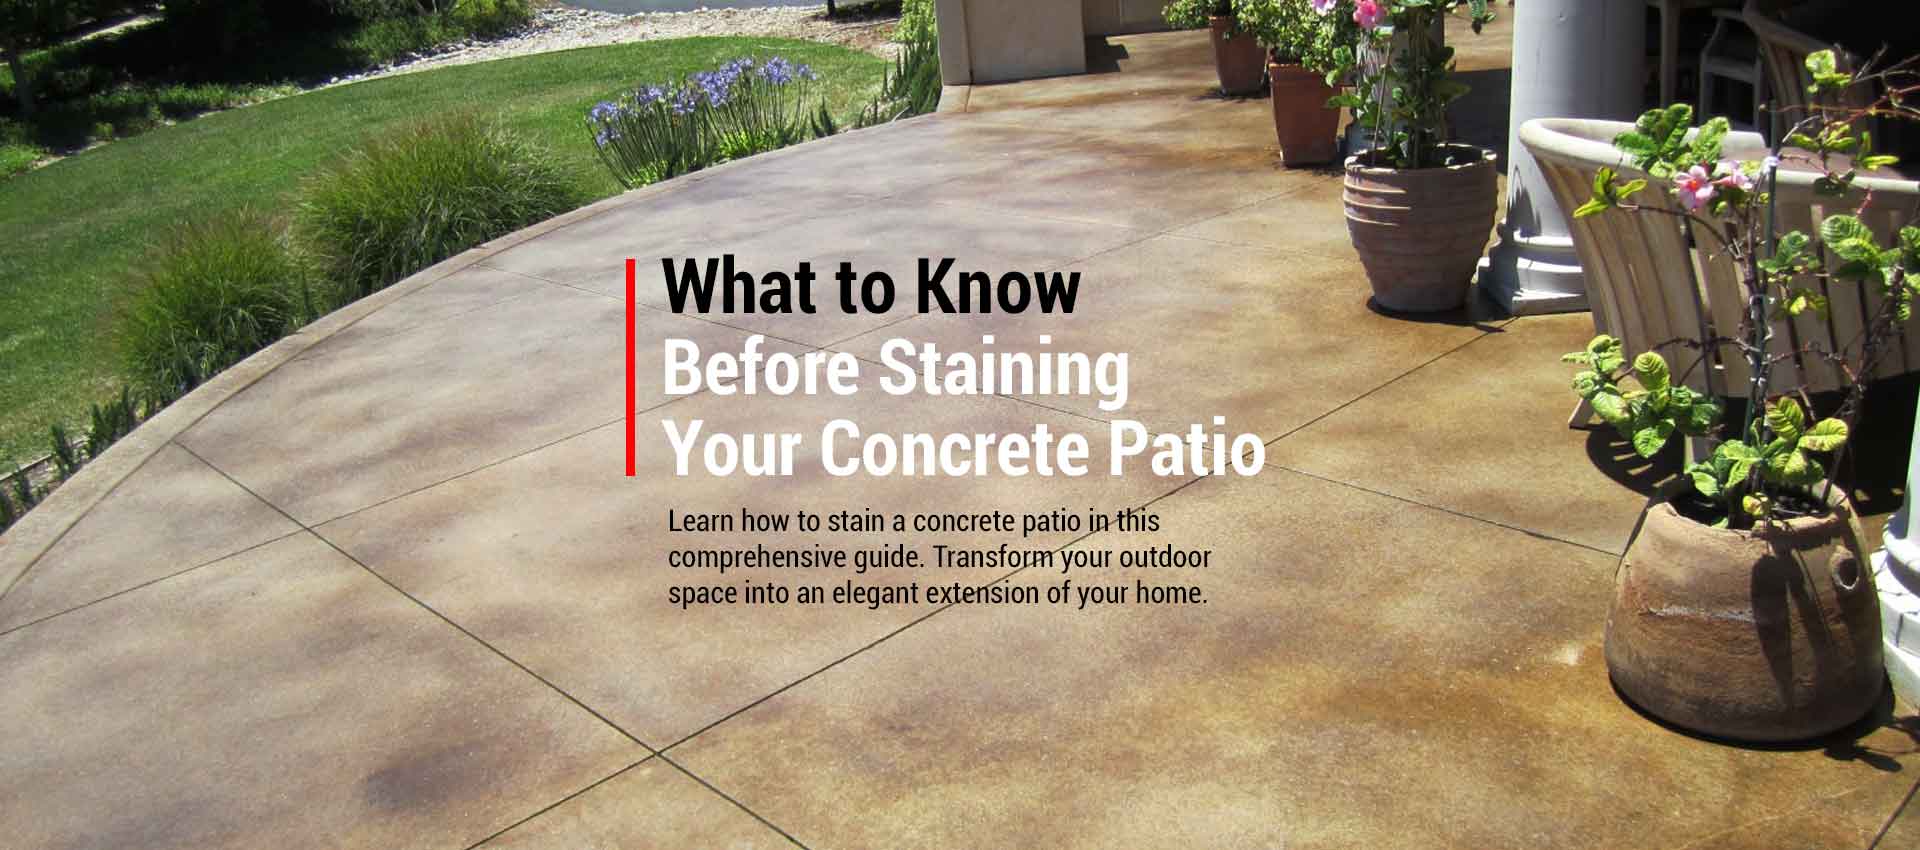 How to Stain a Concrete Patio